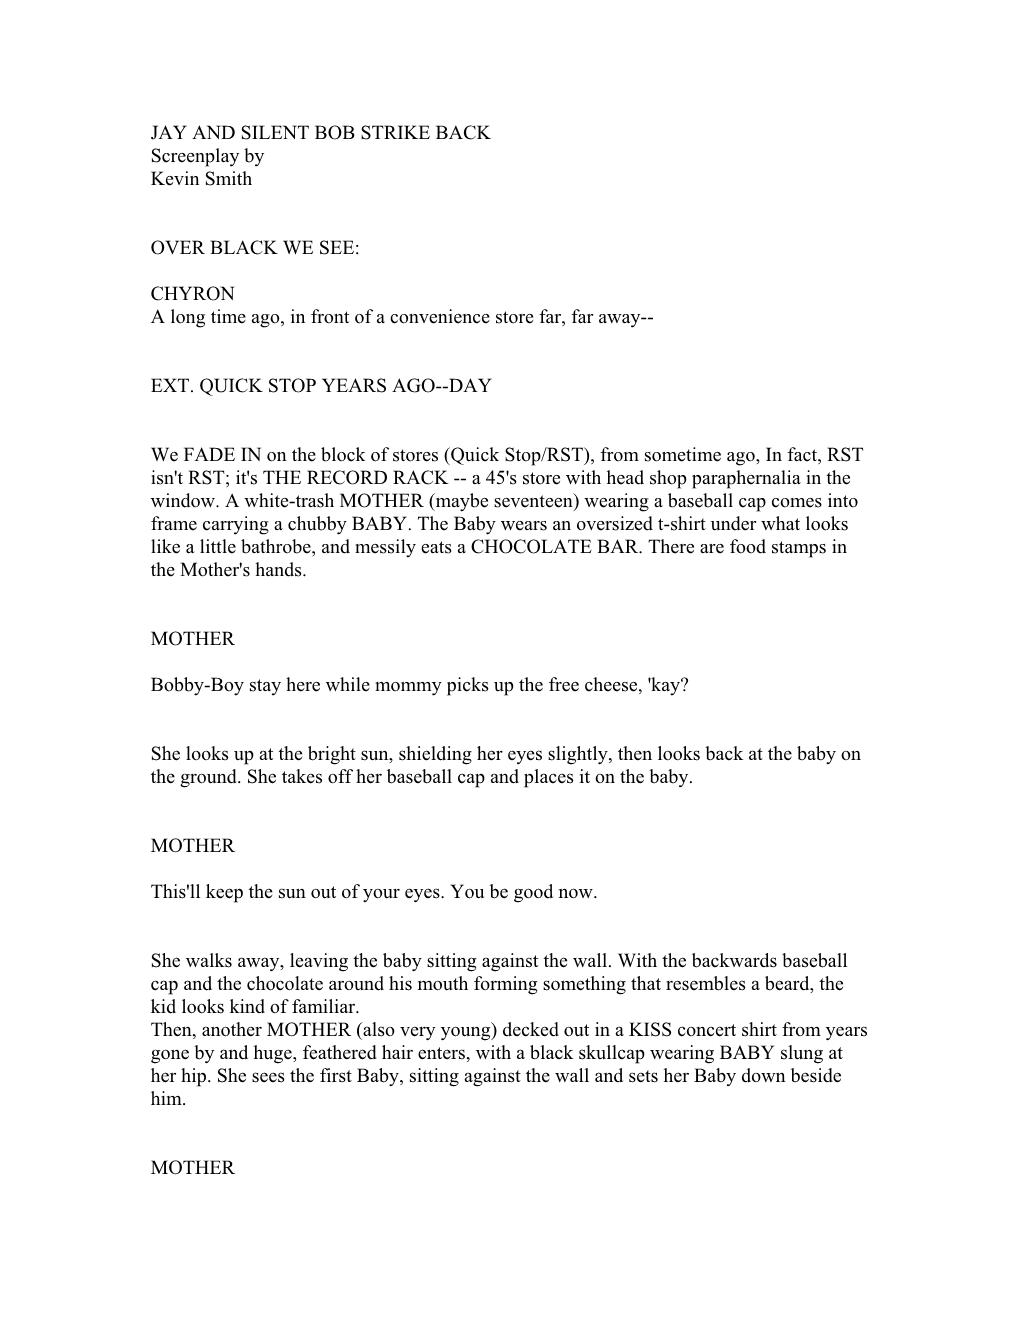 JAY and SILENT BOB STRIKE BACK Screenplay by Kevin Smith